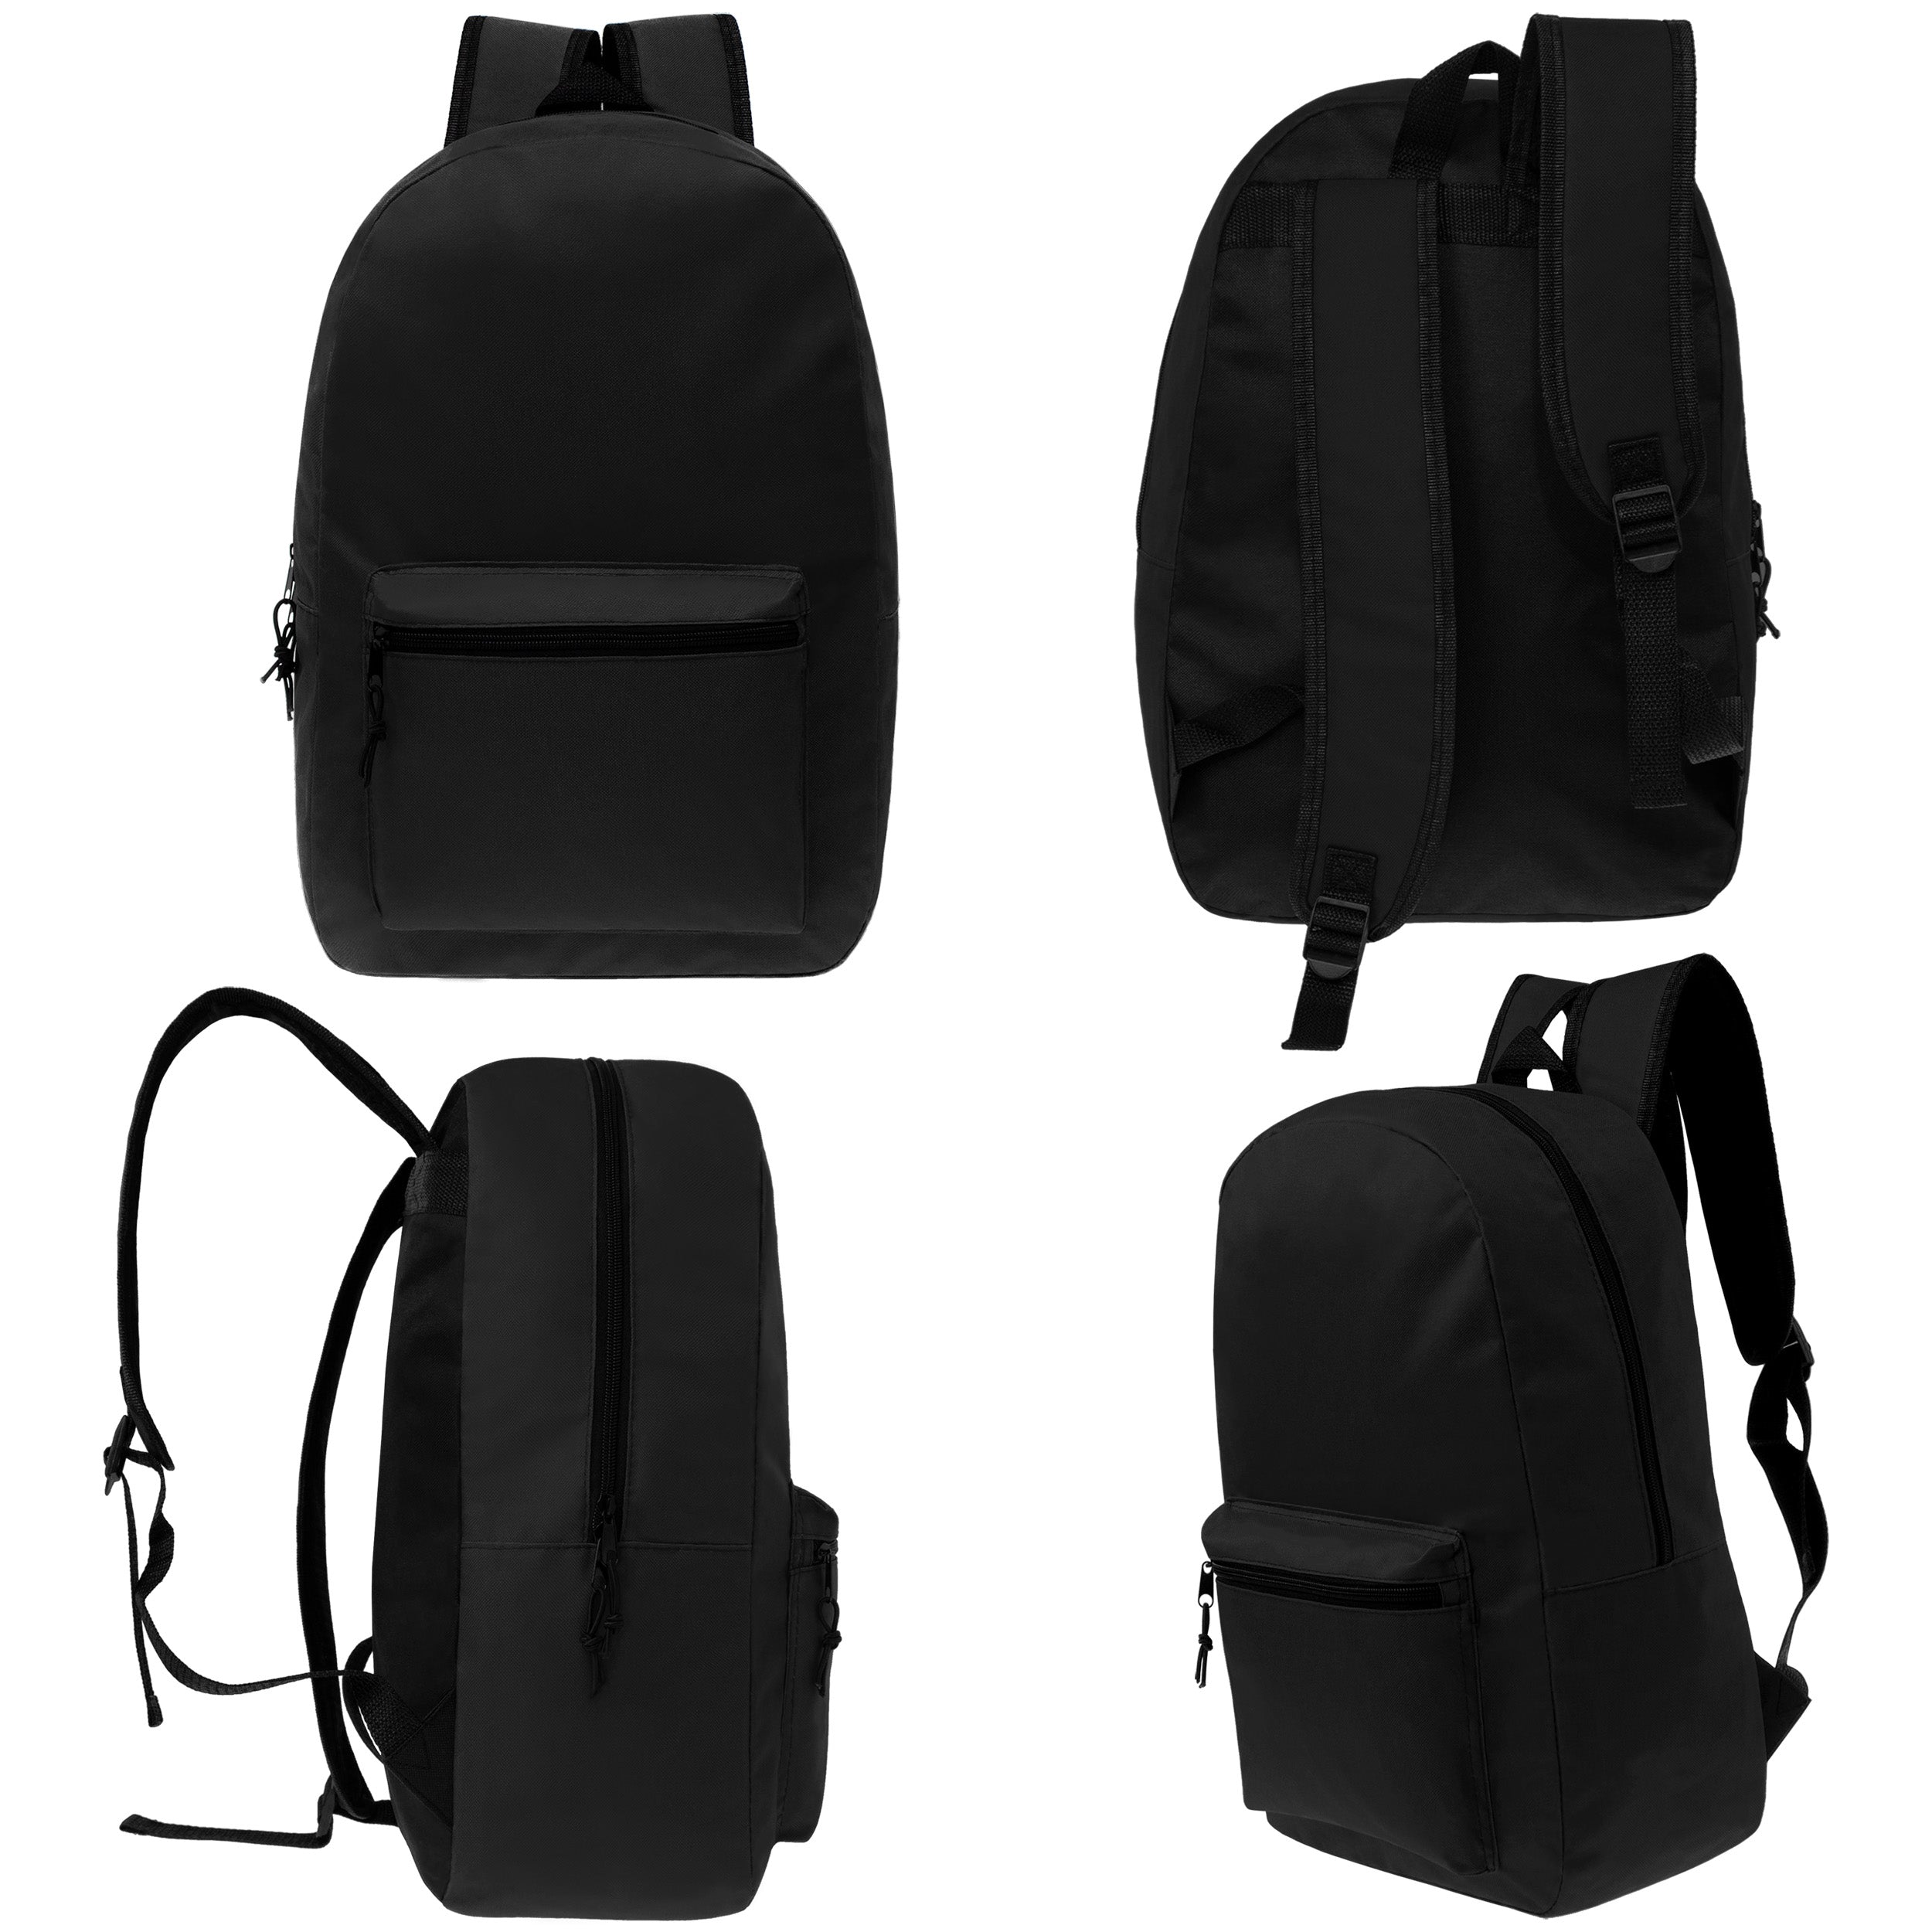 15 inches School Backpacks for Kids In Black Color Bulk School Supplies Kit Case Of 12